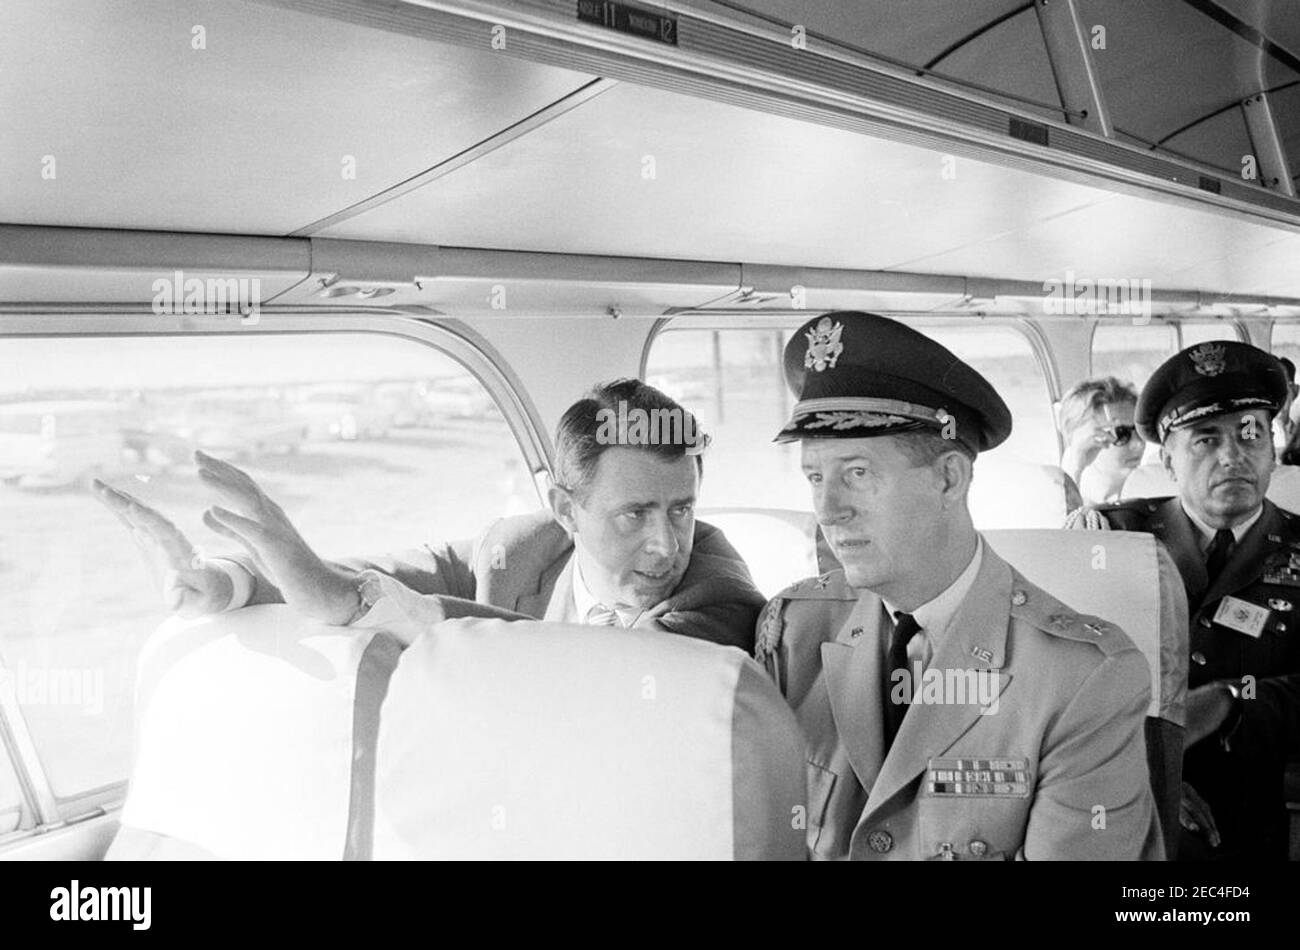 Inspection tour of NASA installations: Huntsville Alabama, Redstone Army Airfield and George C. Marshall Space Flight Center, 9:35AM. Secretary of the Army, Cyrus R. Vance, and Military Aide to the President, General Chester V. Clifton, sit on a bus, during President John F. Kennedyu0027s visit to Redstone Arsenal, Huntsville, Alabama, as part of a two-day inspection tour of National Aeronautics and Space Administration (NASA) field installations. Air Force Aide to the President, Brigadier General Godfrey T. McHugh, sits behind General Clifton. Stock Photo